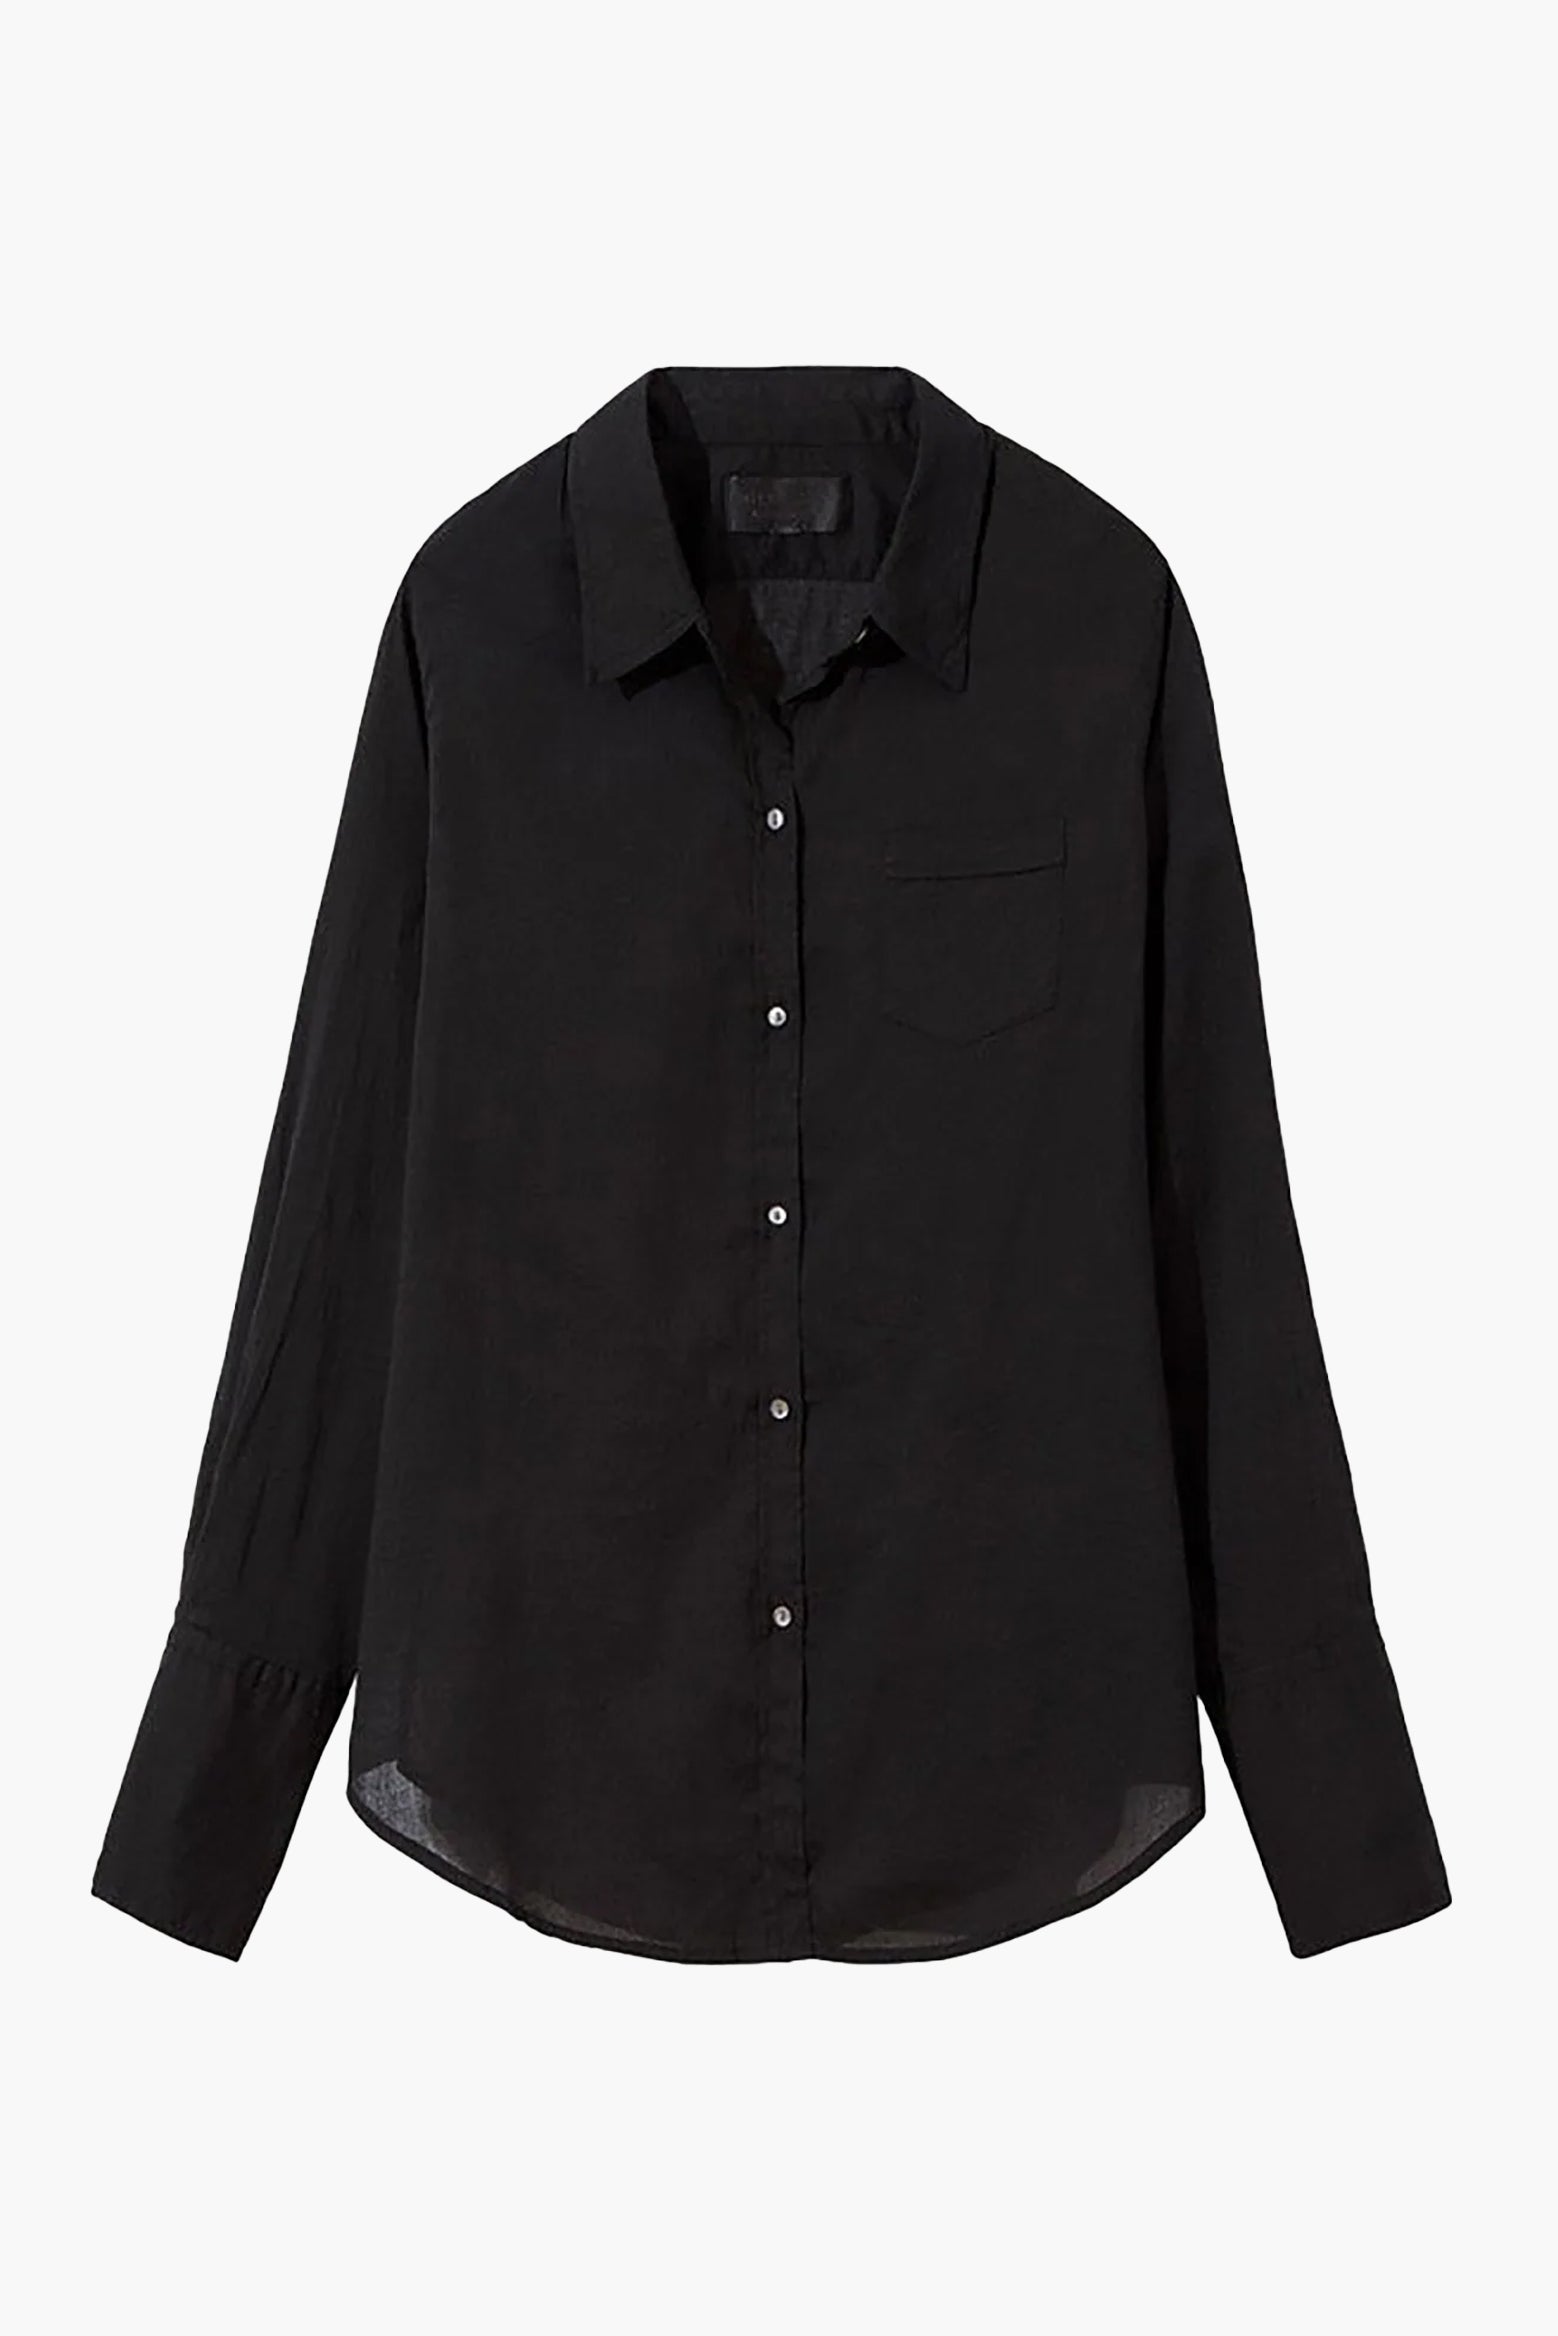 Nili Lotan Cotton Voile NL Shirt in Black available at The New Trend Australia. 